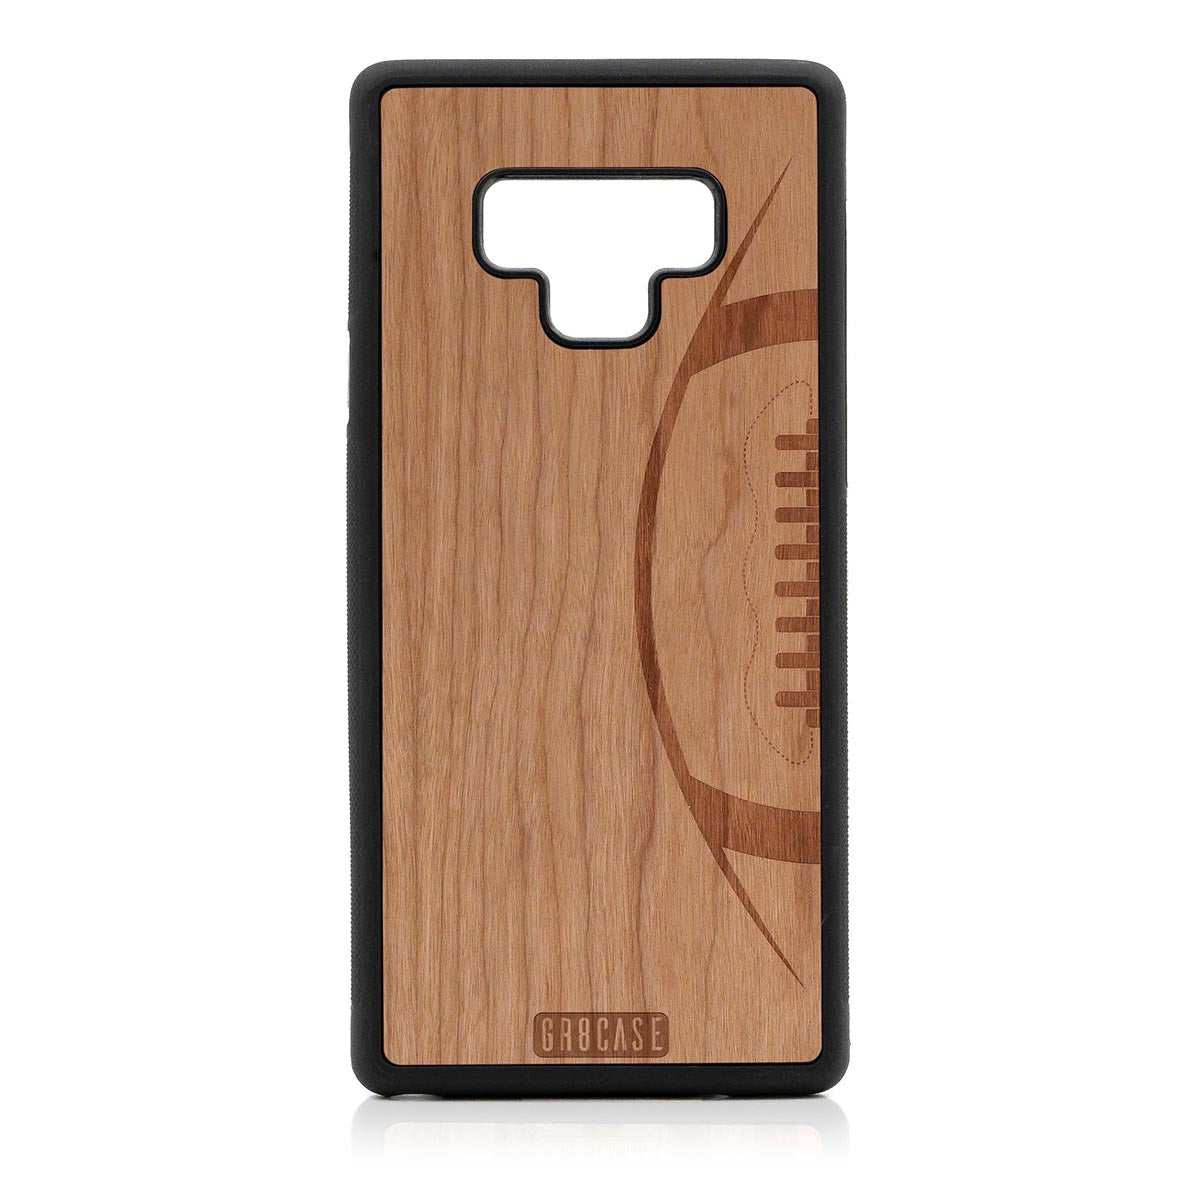 Football Design Wood Case For Samsung Galaxy Note 9 by GR8CASE